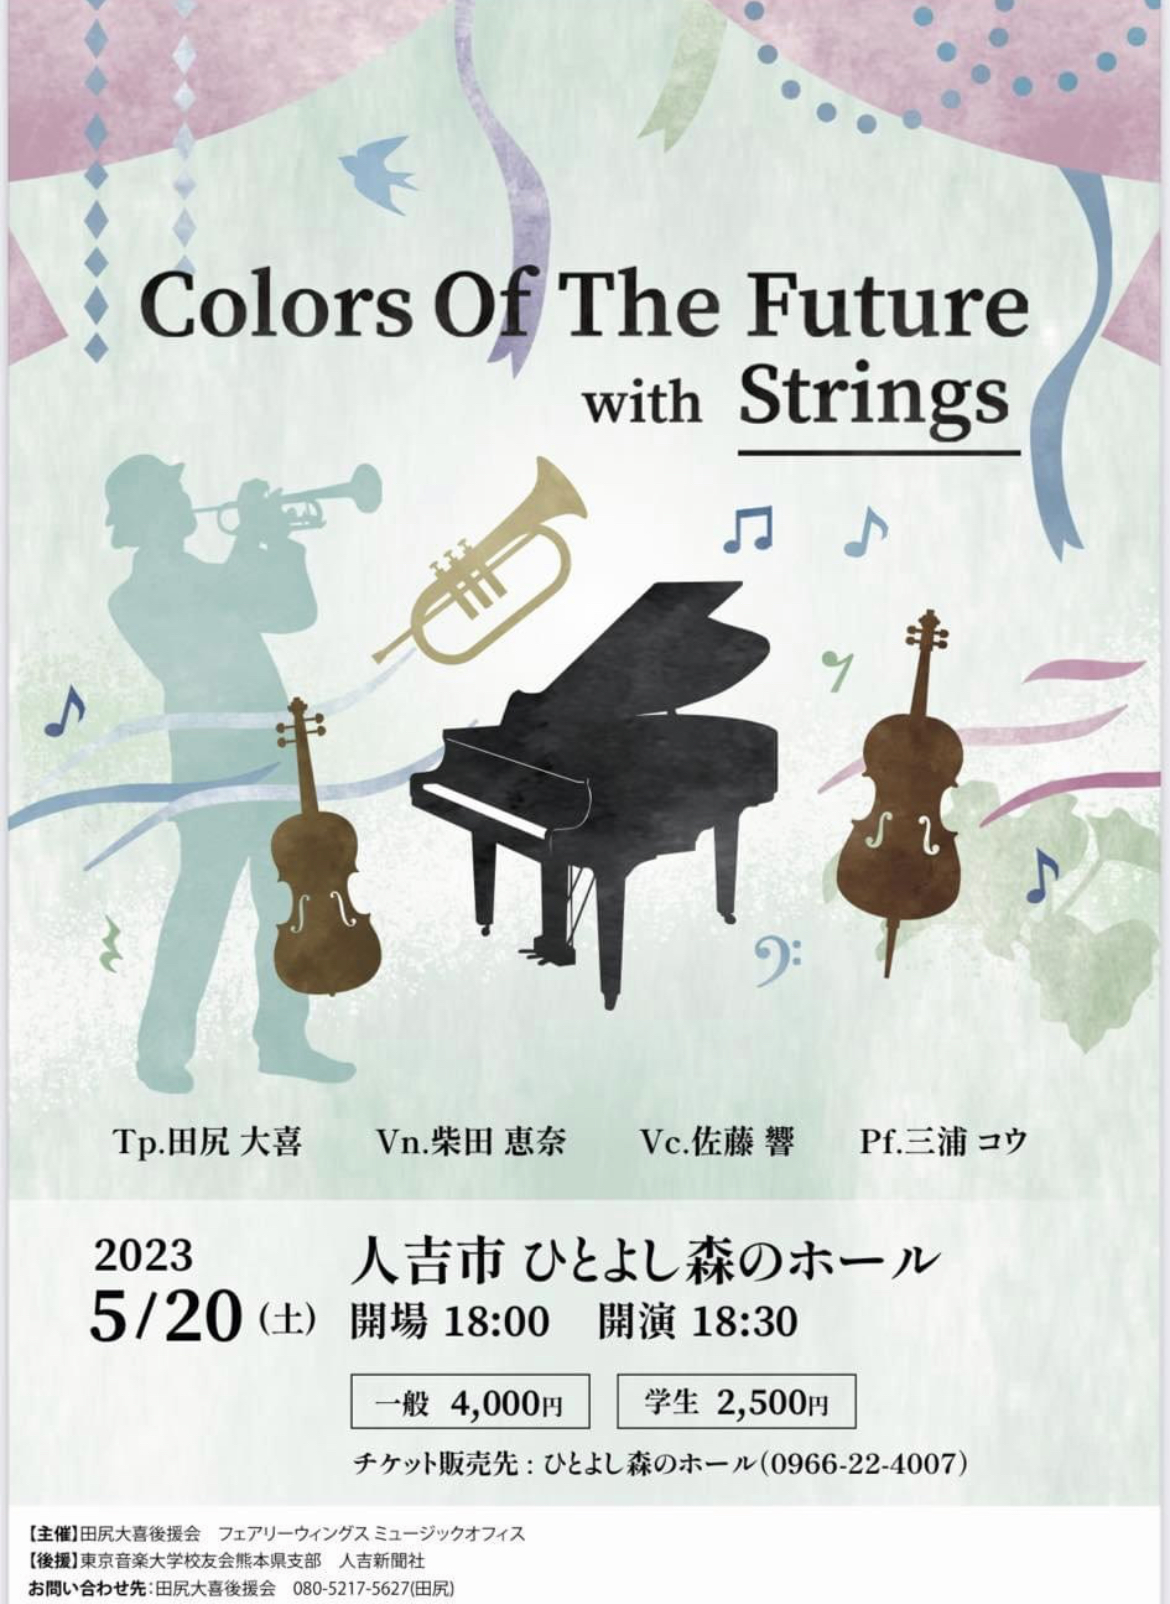 Colors Of The Future with Strings